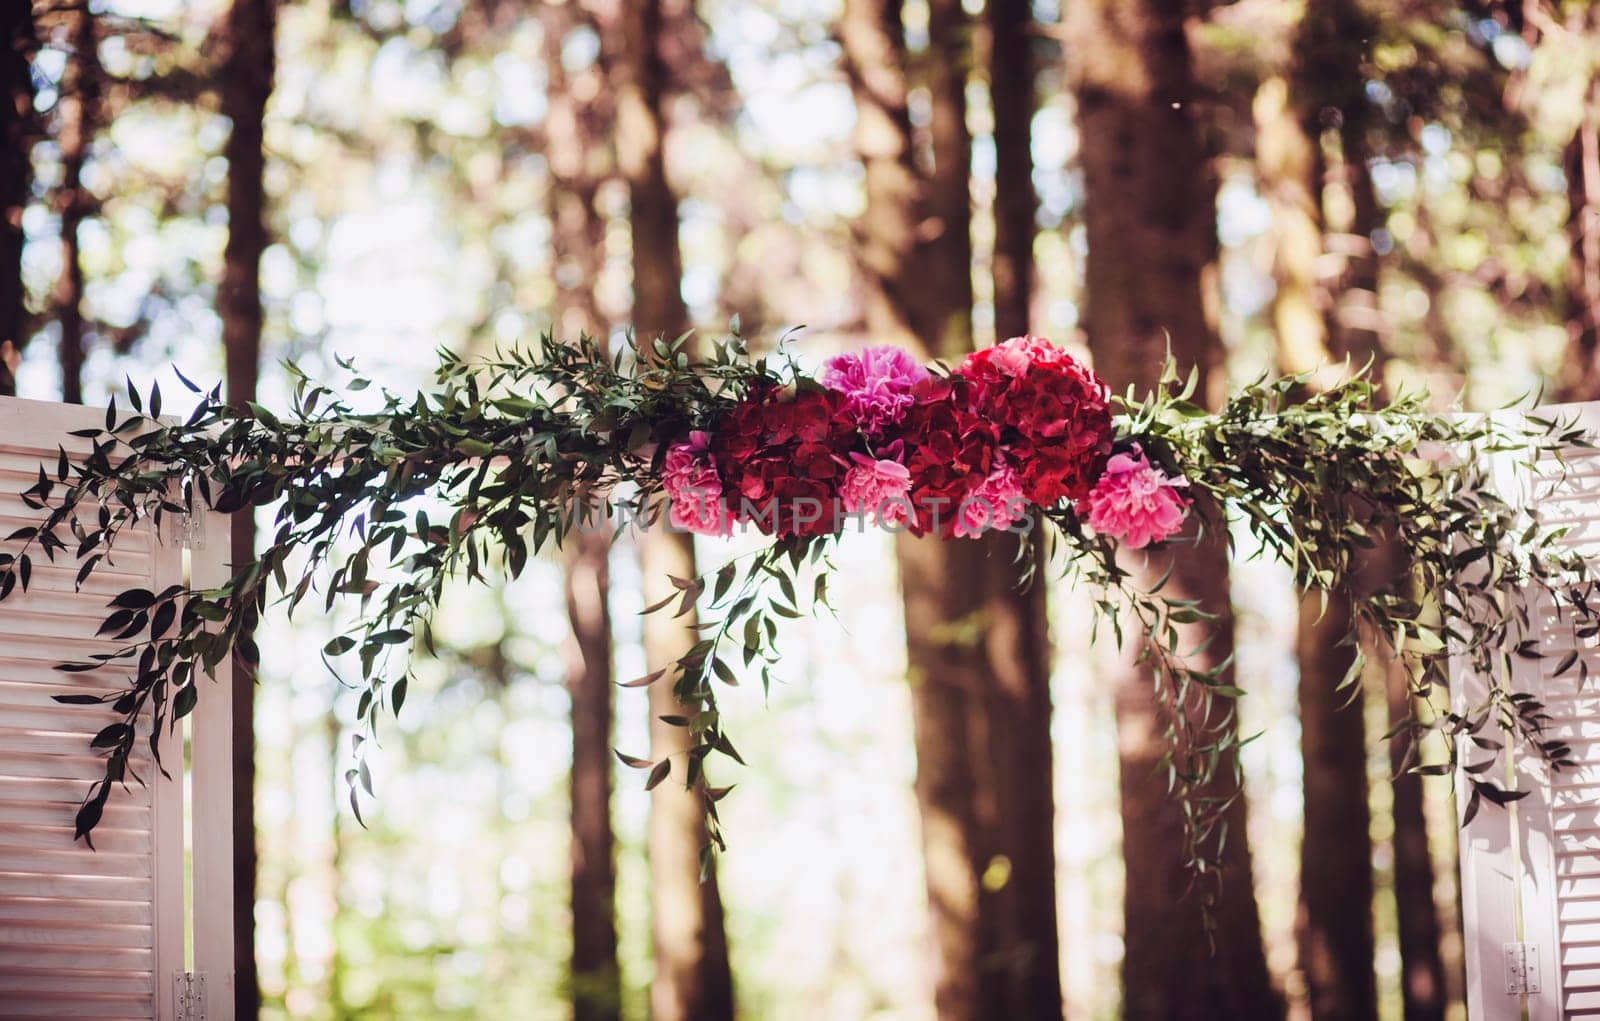 wedding arch decorated with bright flowers by Ladouski